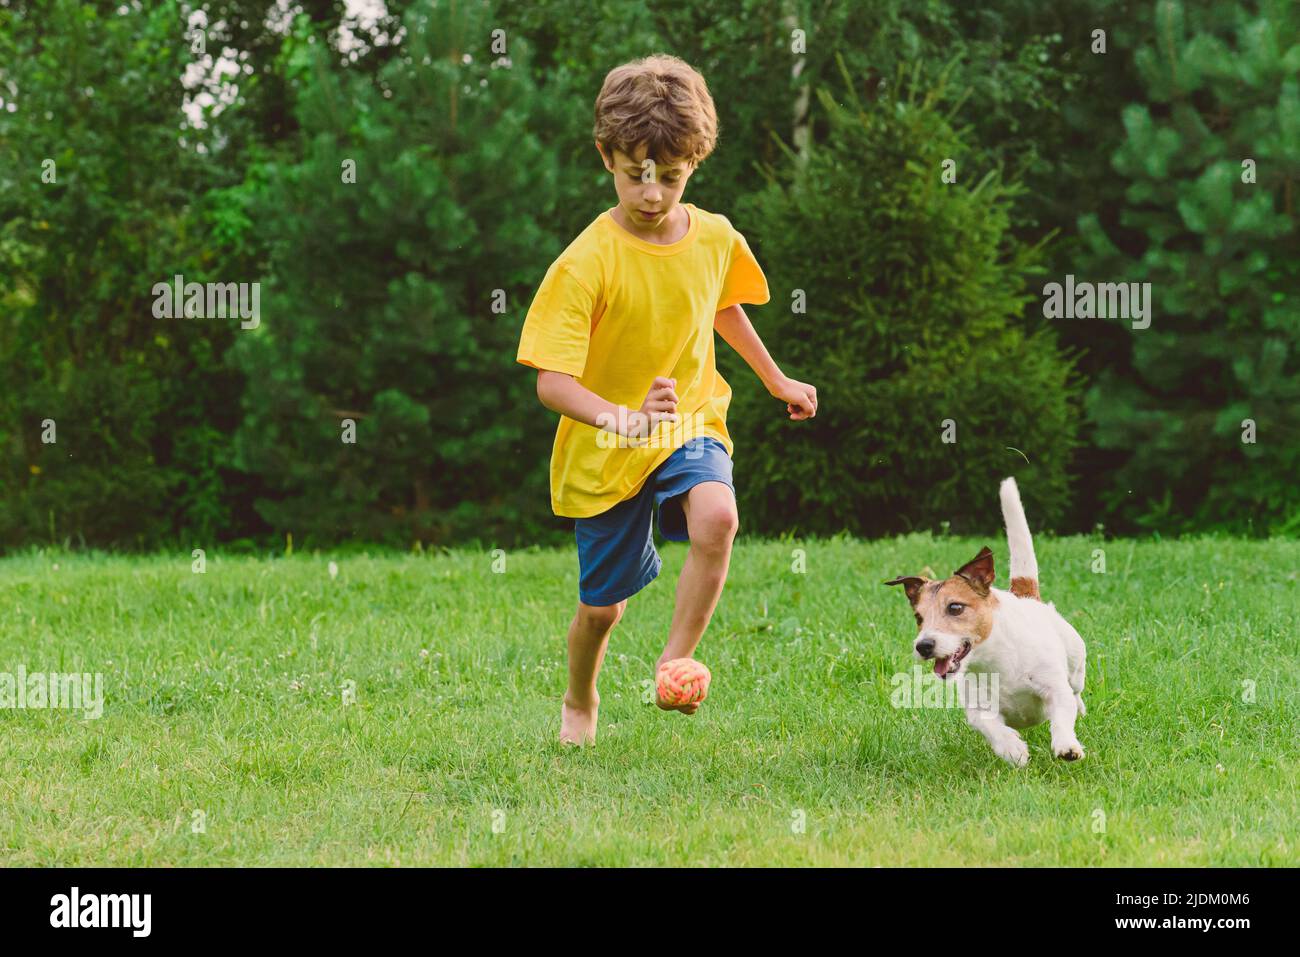 Boy wishes to be football player uses pet toy instead of football ball to train and play soccer with his dog Stock Photo